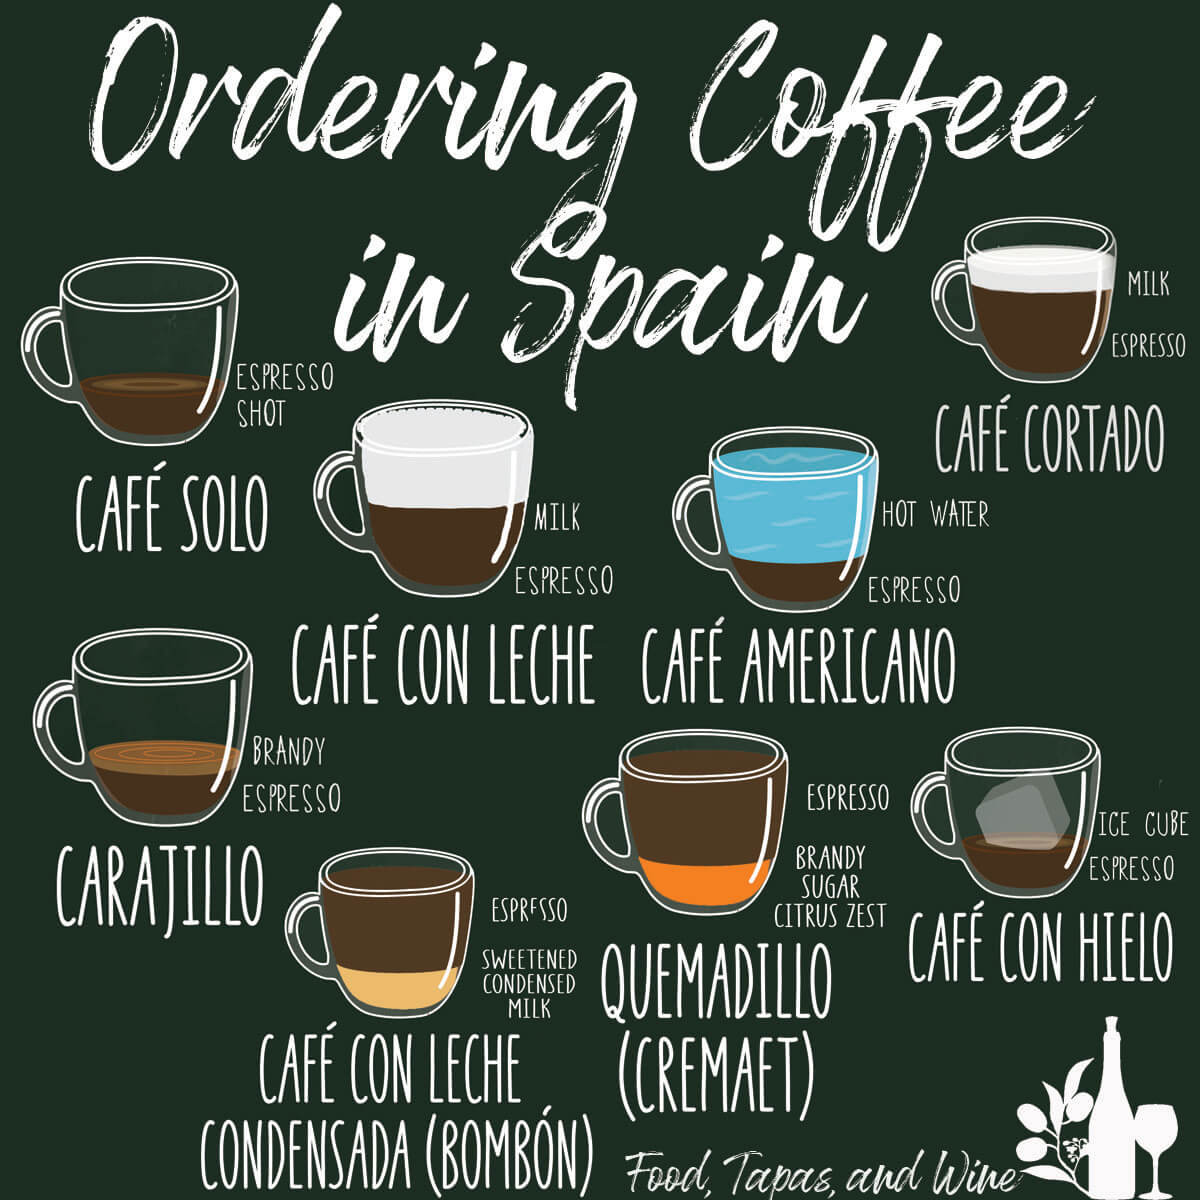 Drawing of several types of coffee that can be ordered in Spain